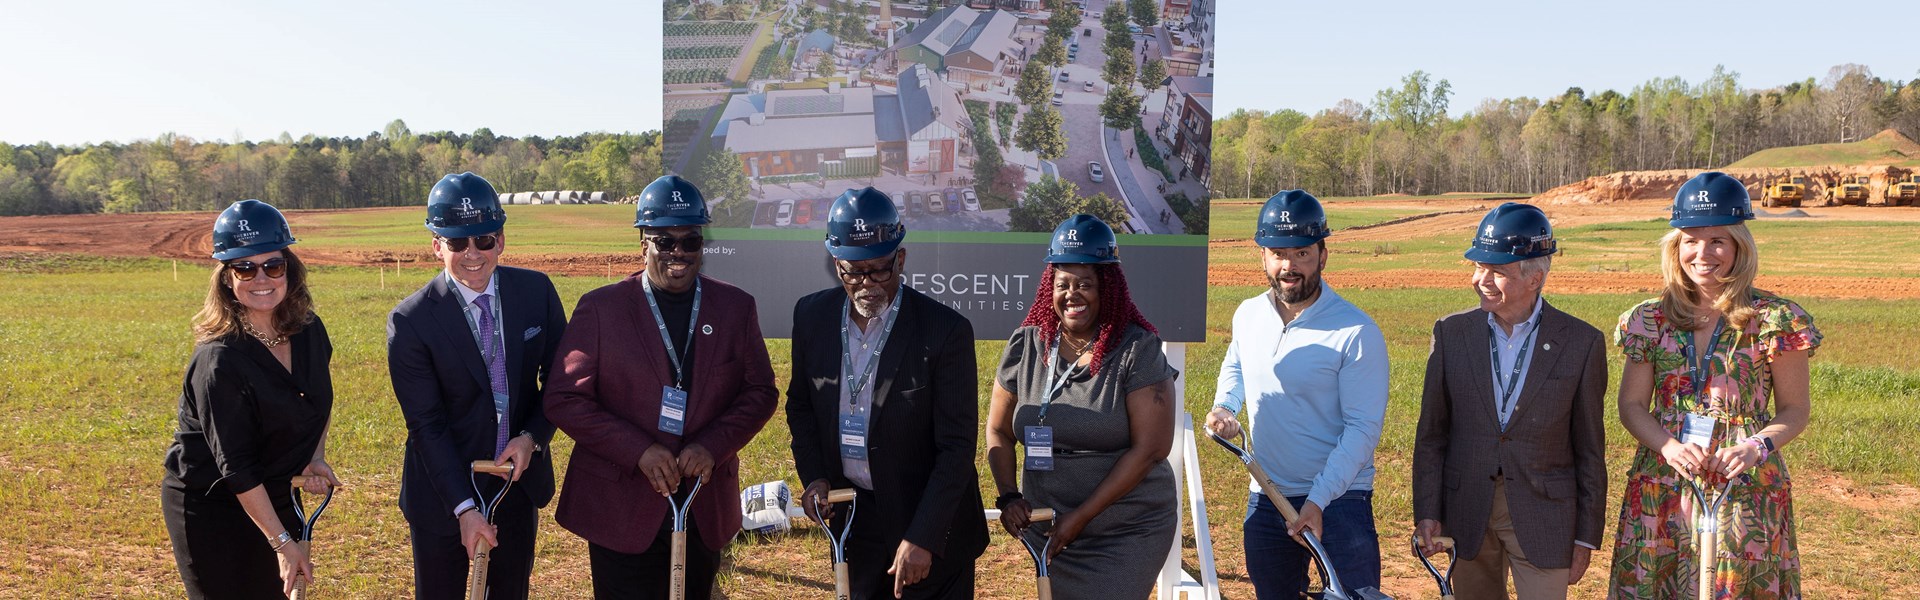 Crescent Communities Hosts Ceremonial Groundbreaking for The River District